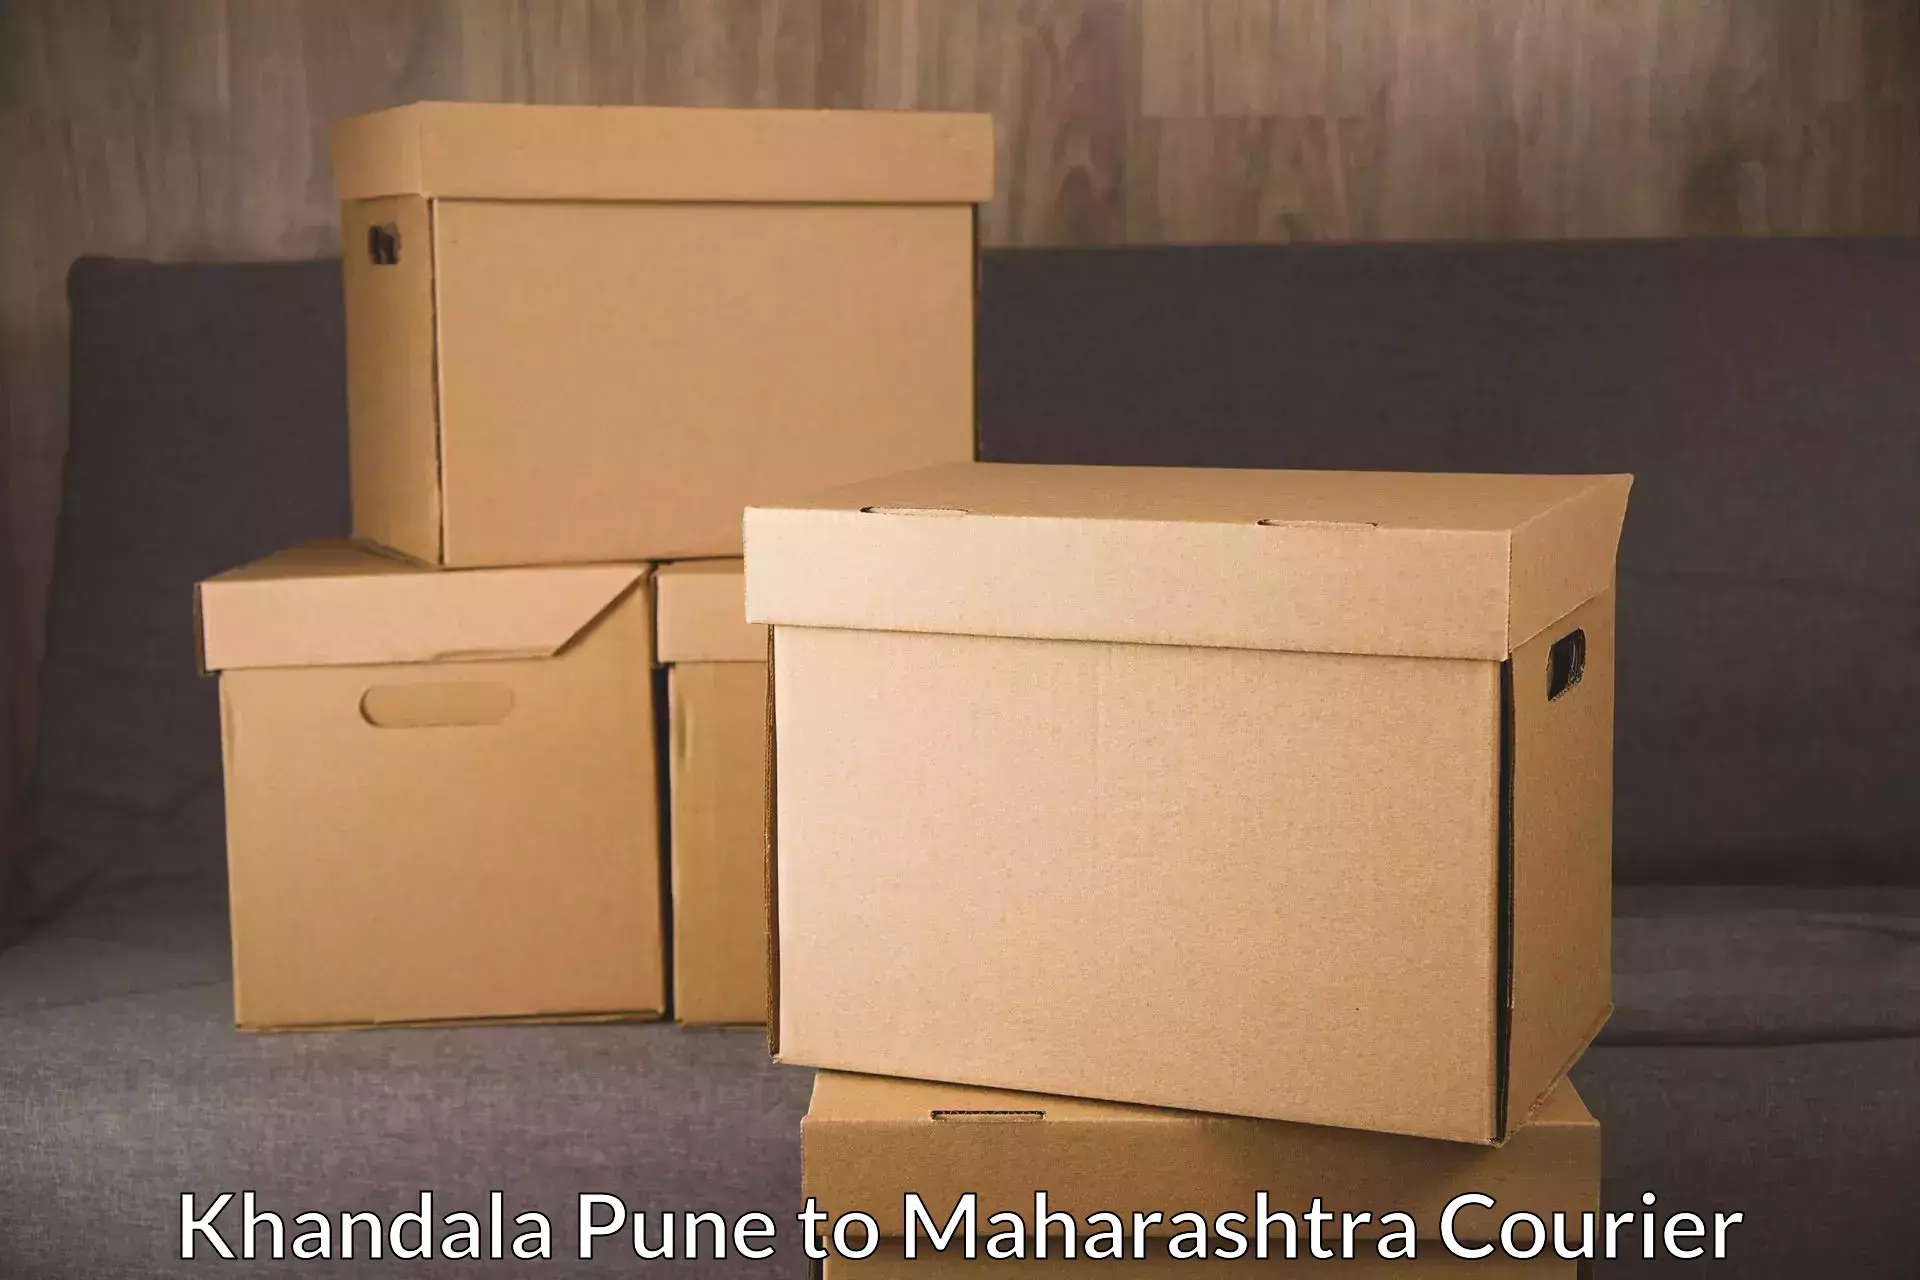 Express delivery capabilities in Khandala Pune to Parner